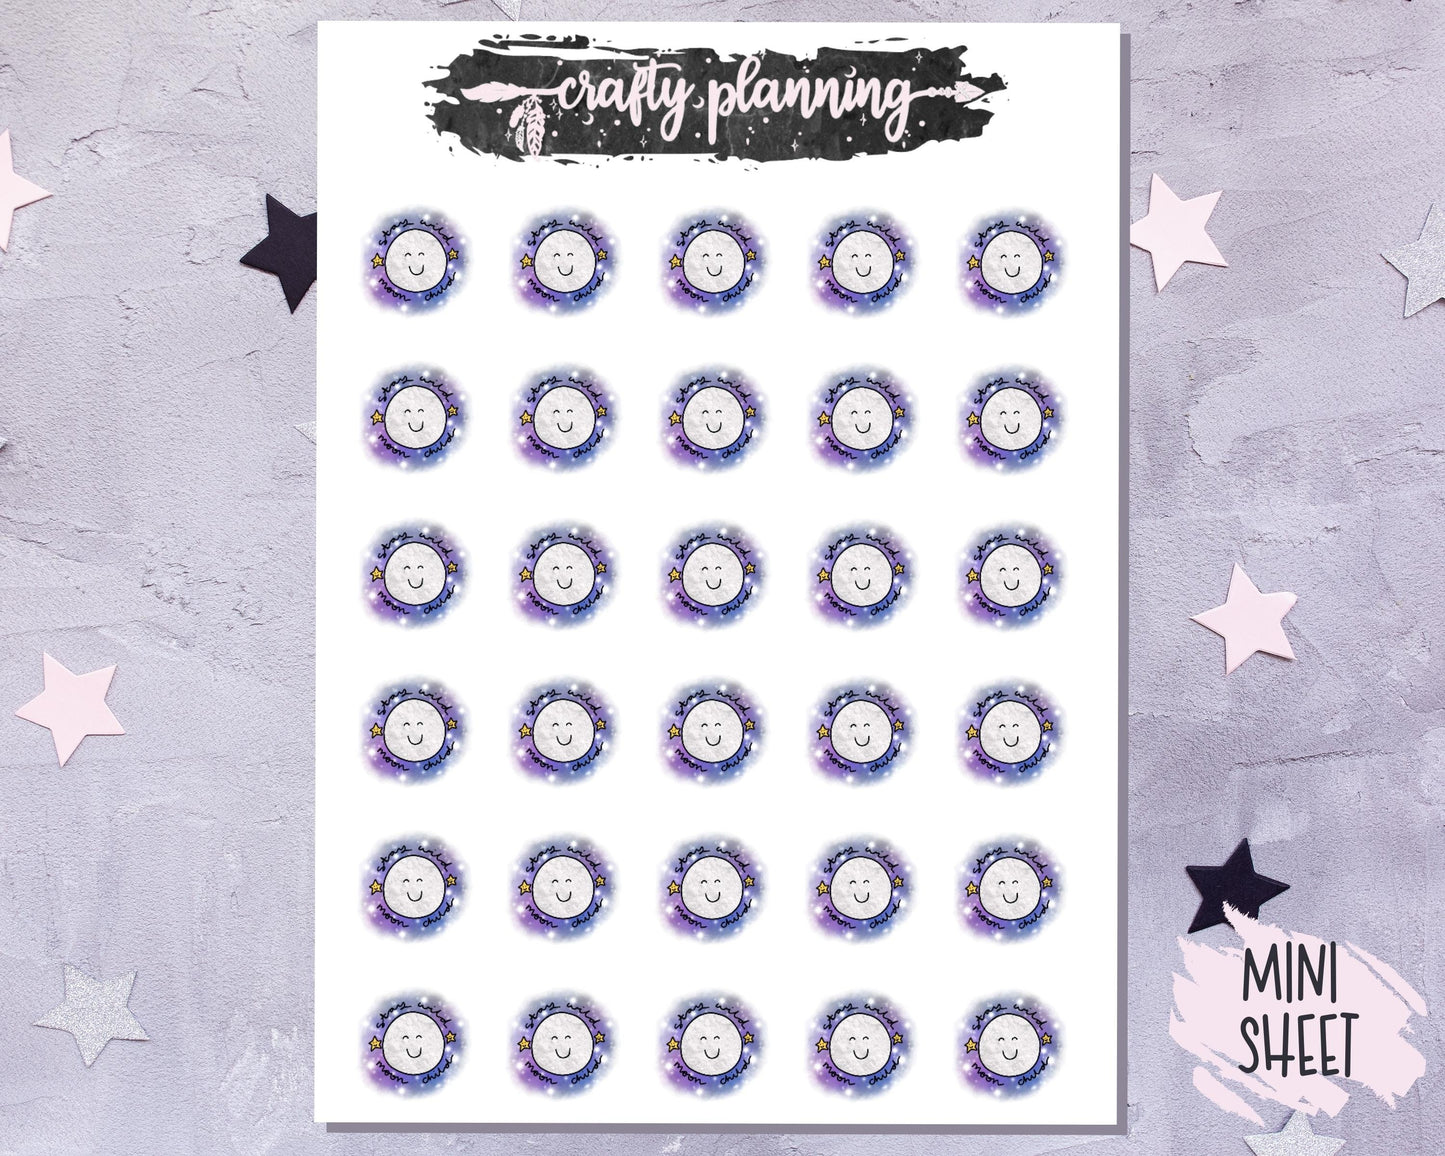 Stay Wild Moon Child Stickers, Moon Stickers, Witchy Stickers, Witchcraft Stickers, Planner Stickers, Hand Drawn Stickers